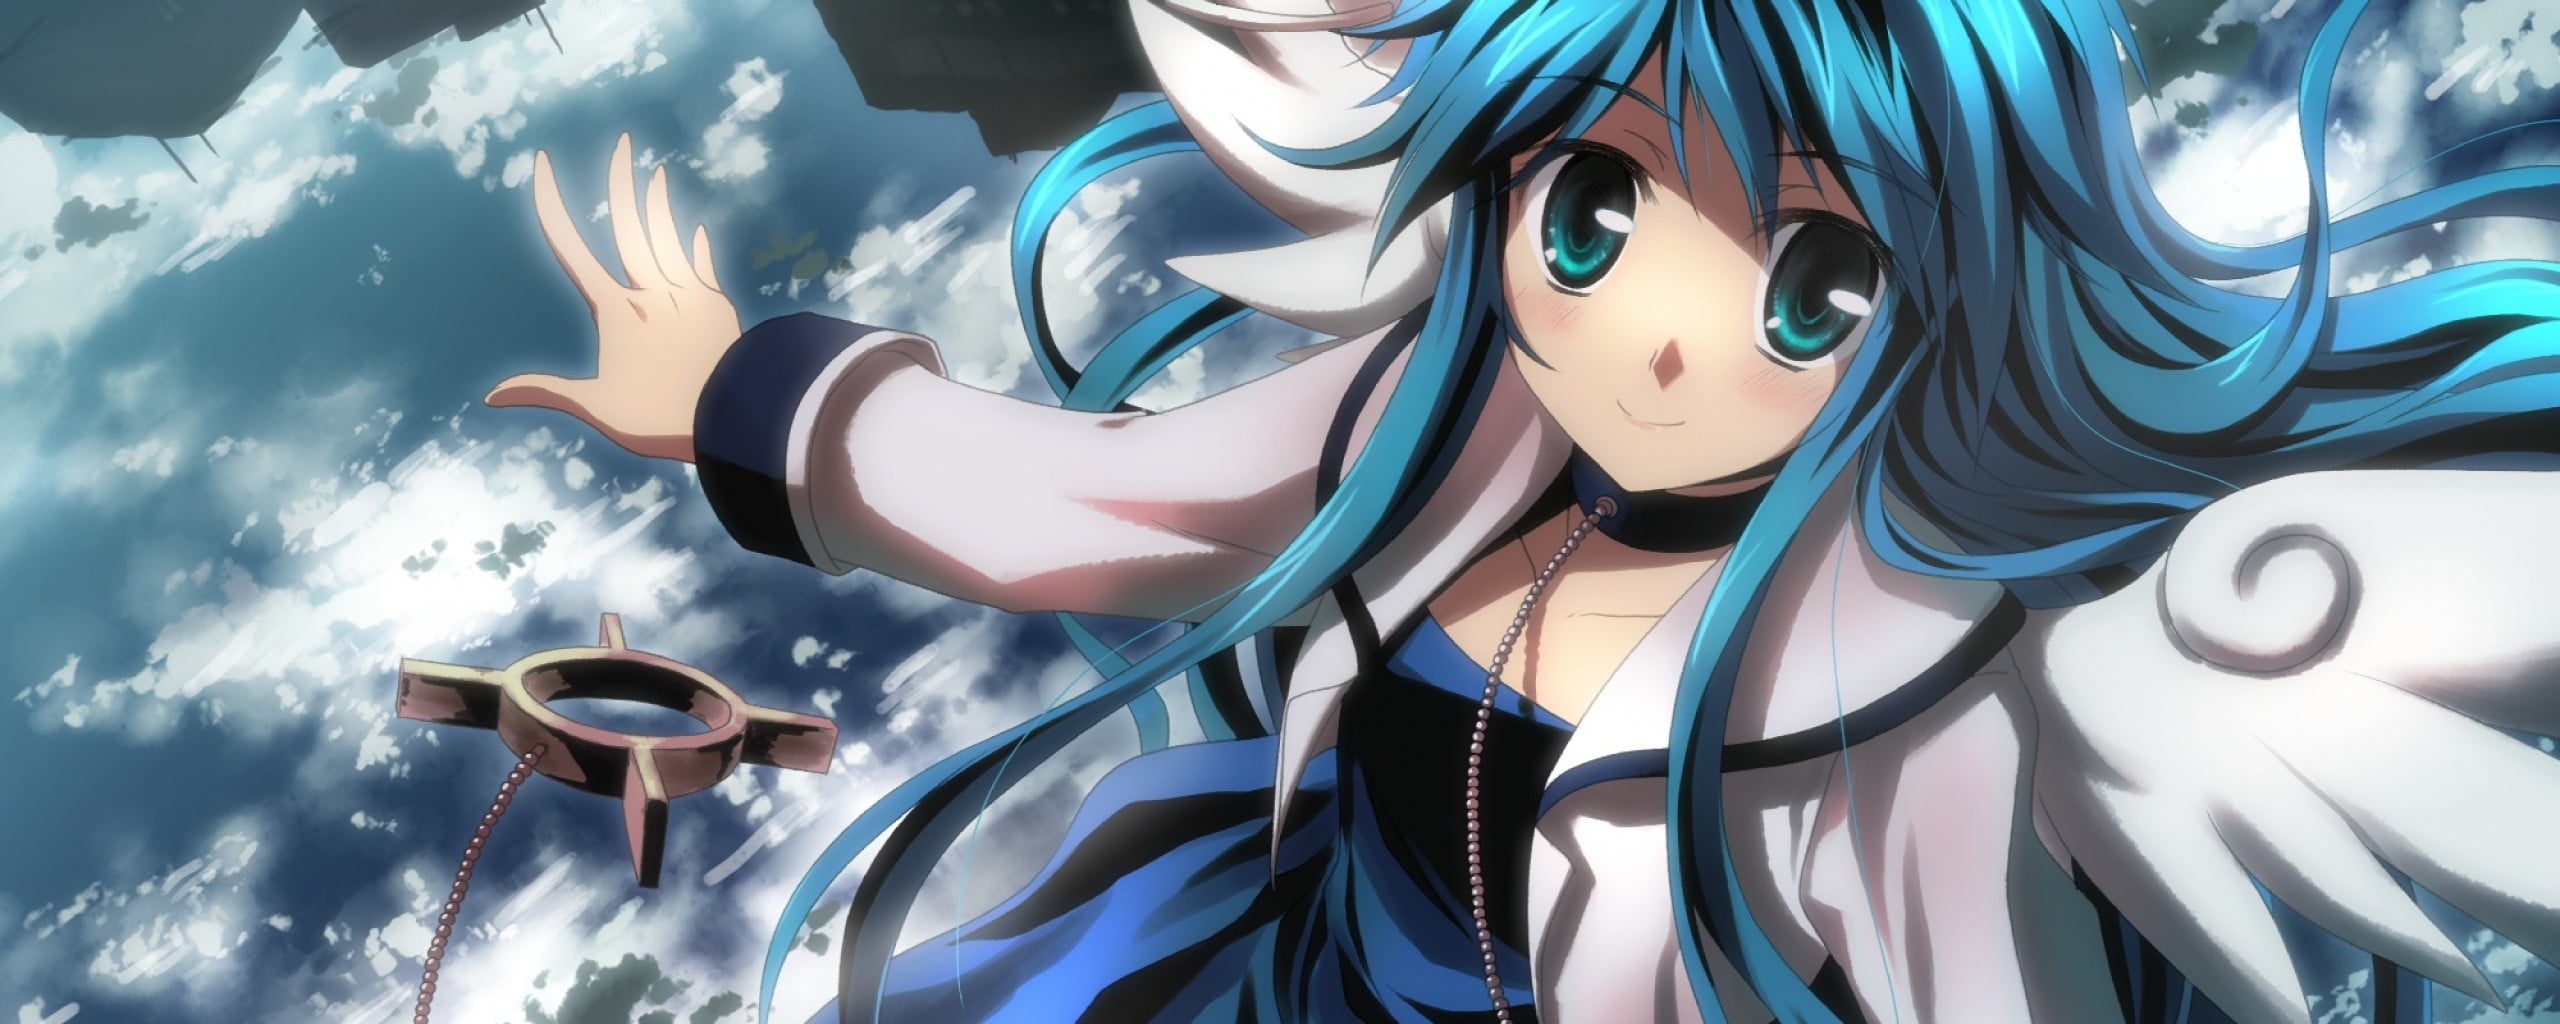 10 Anime Characters With Blue Hair That Will Make You Want to Change Your Hair Color - wide 2